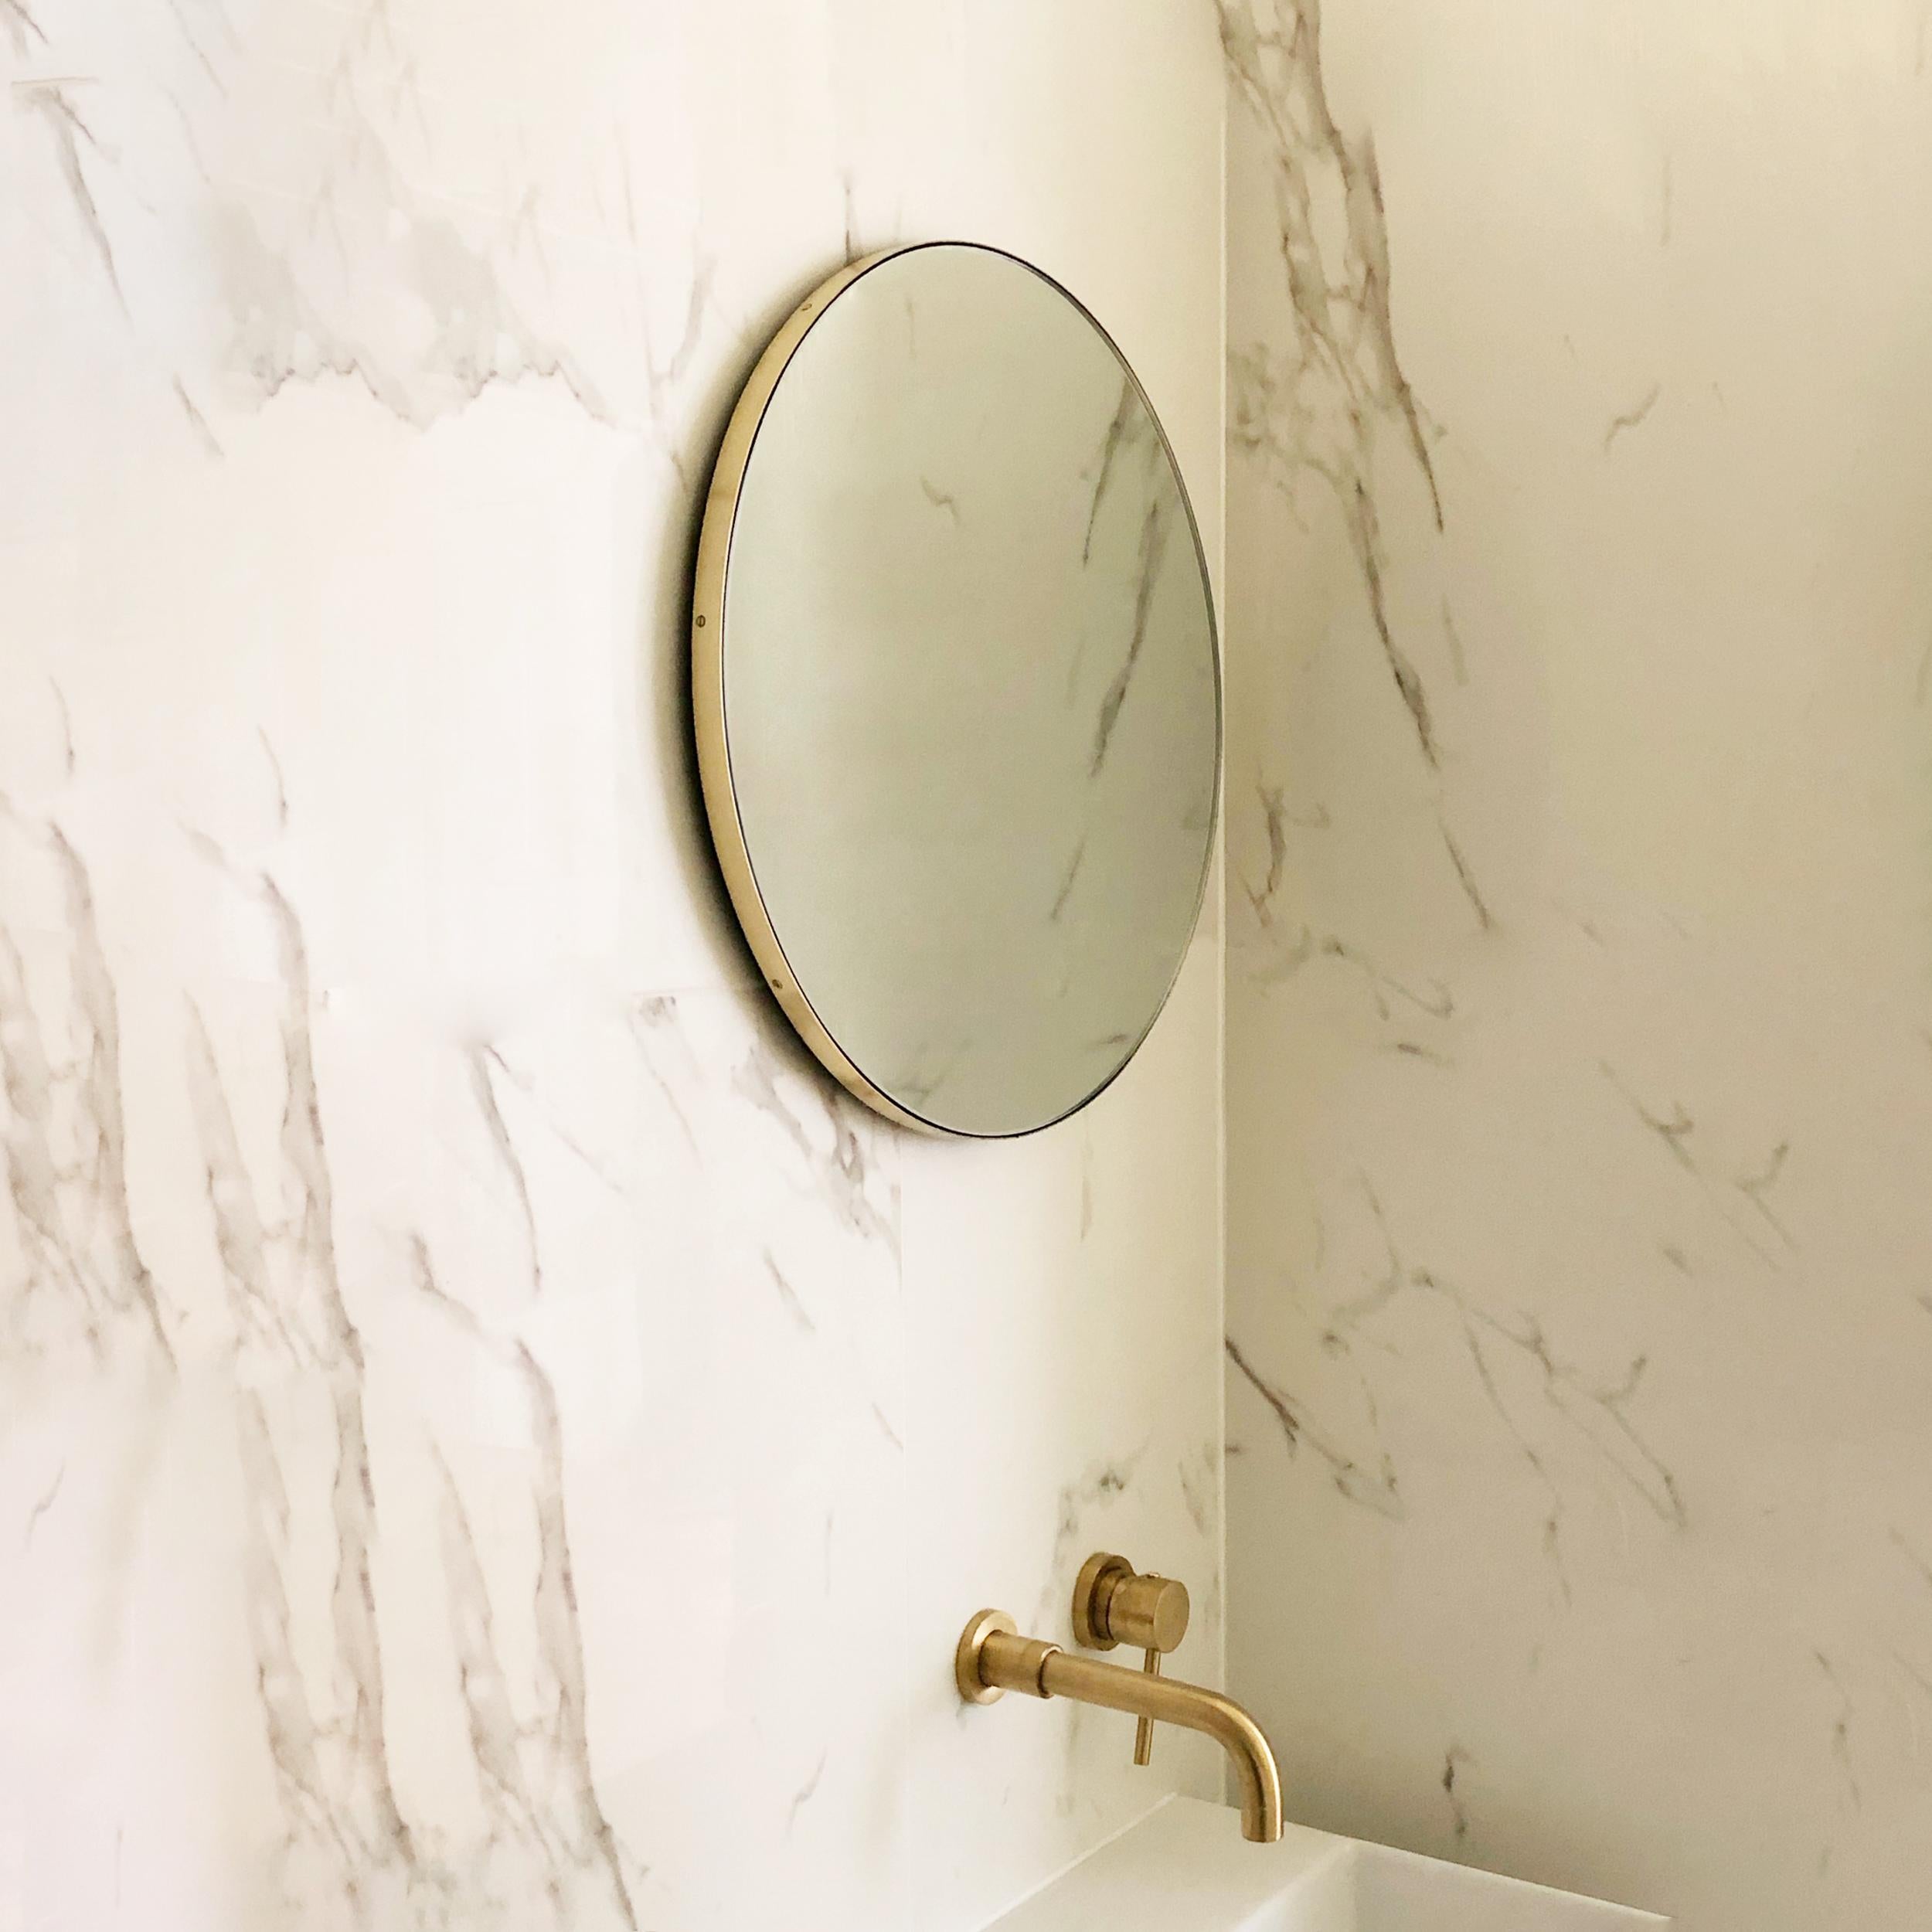 Minimalist Orbis™ round mirror with an elegant solid brushed brass frame. The detailing and finish, including visible brass screws, emphasise the crafty and quality feel of the mirror, a true signature of our brand. Designed and made in London,